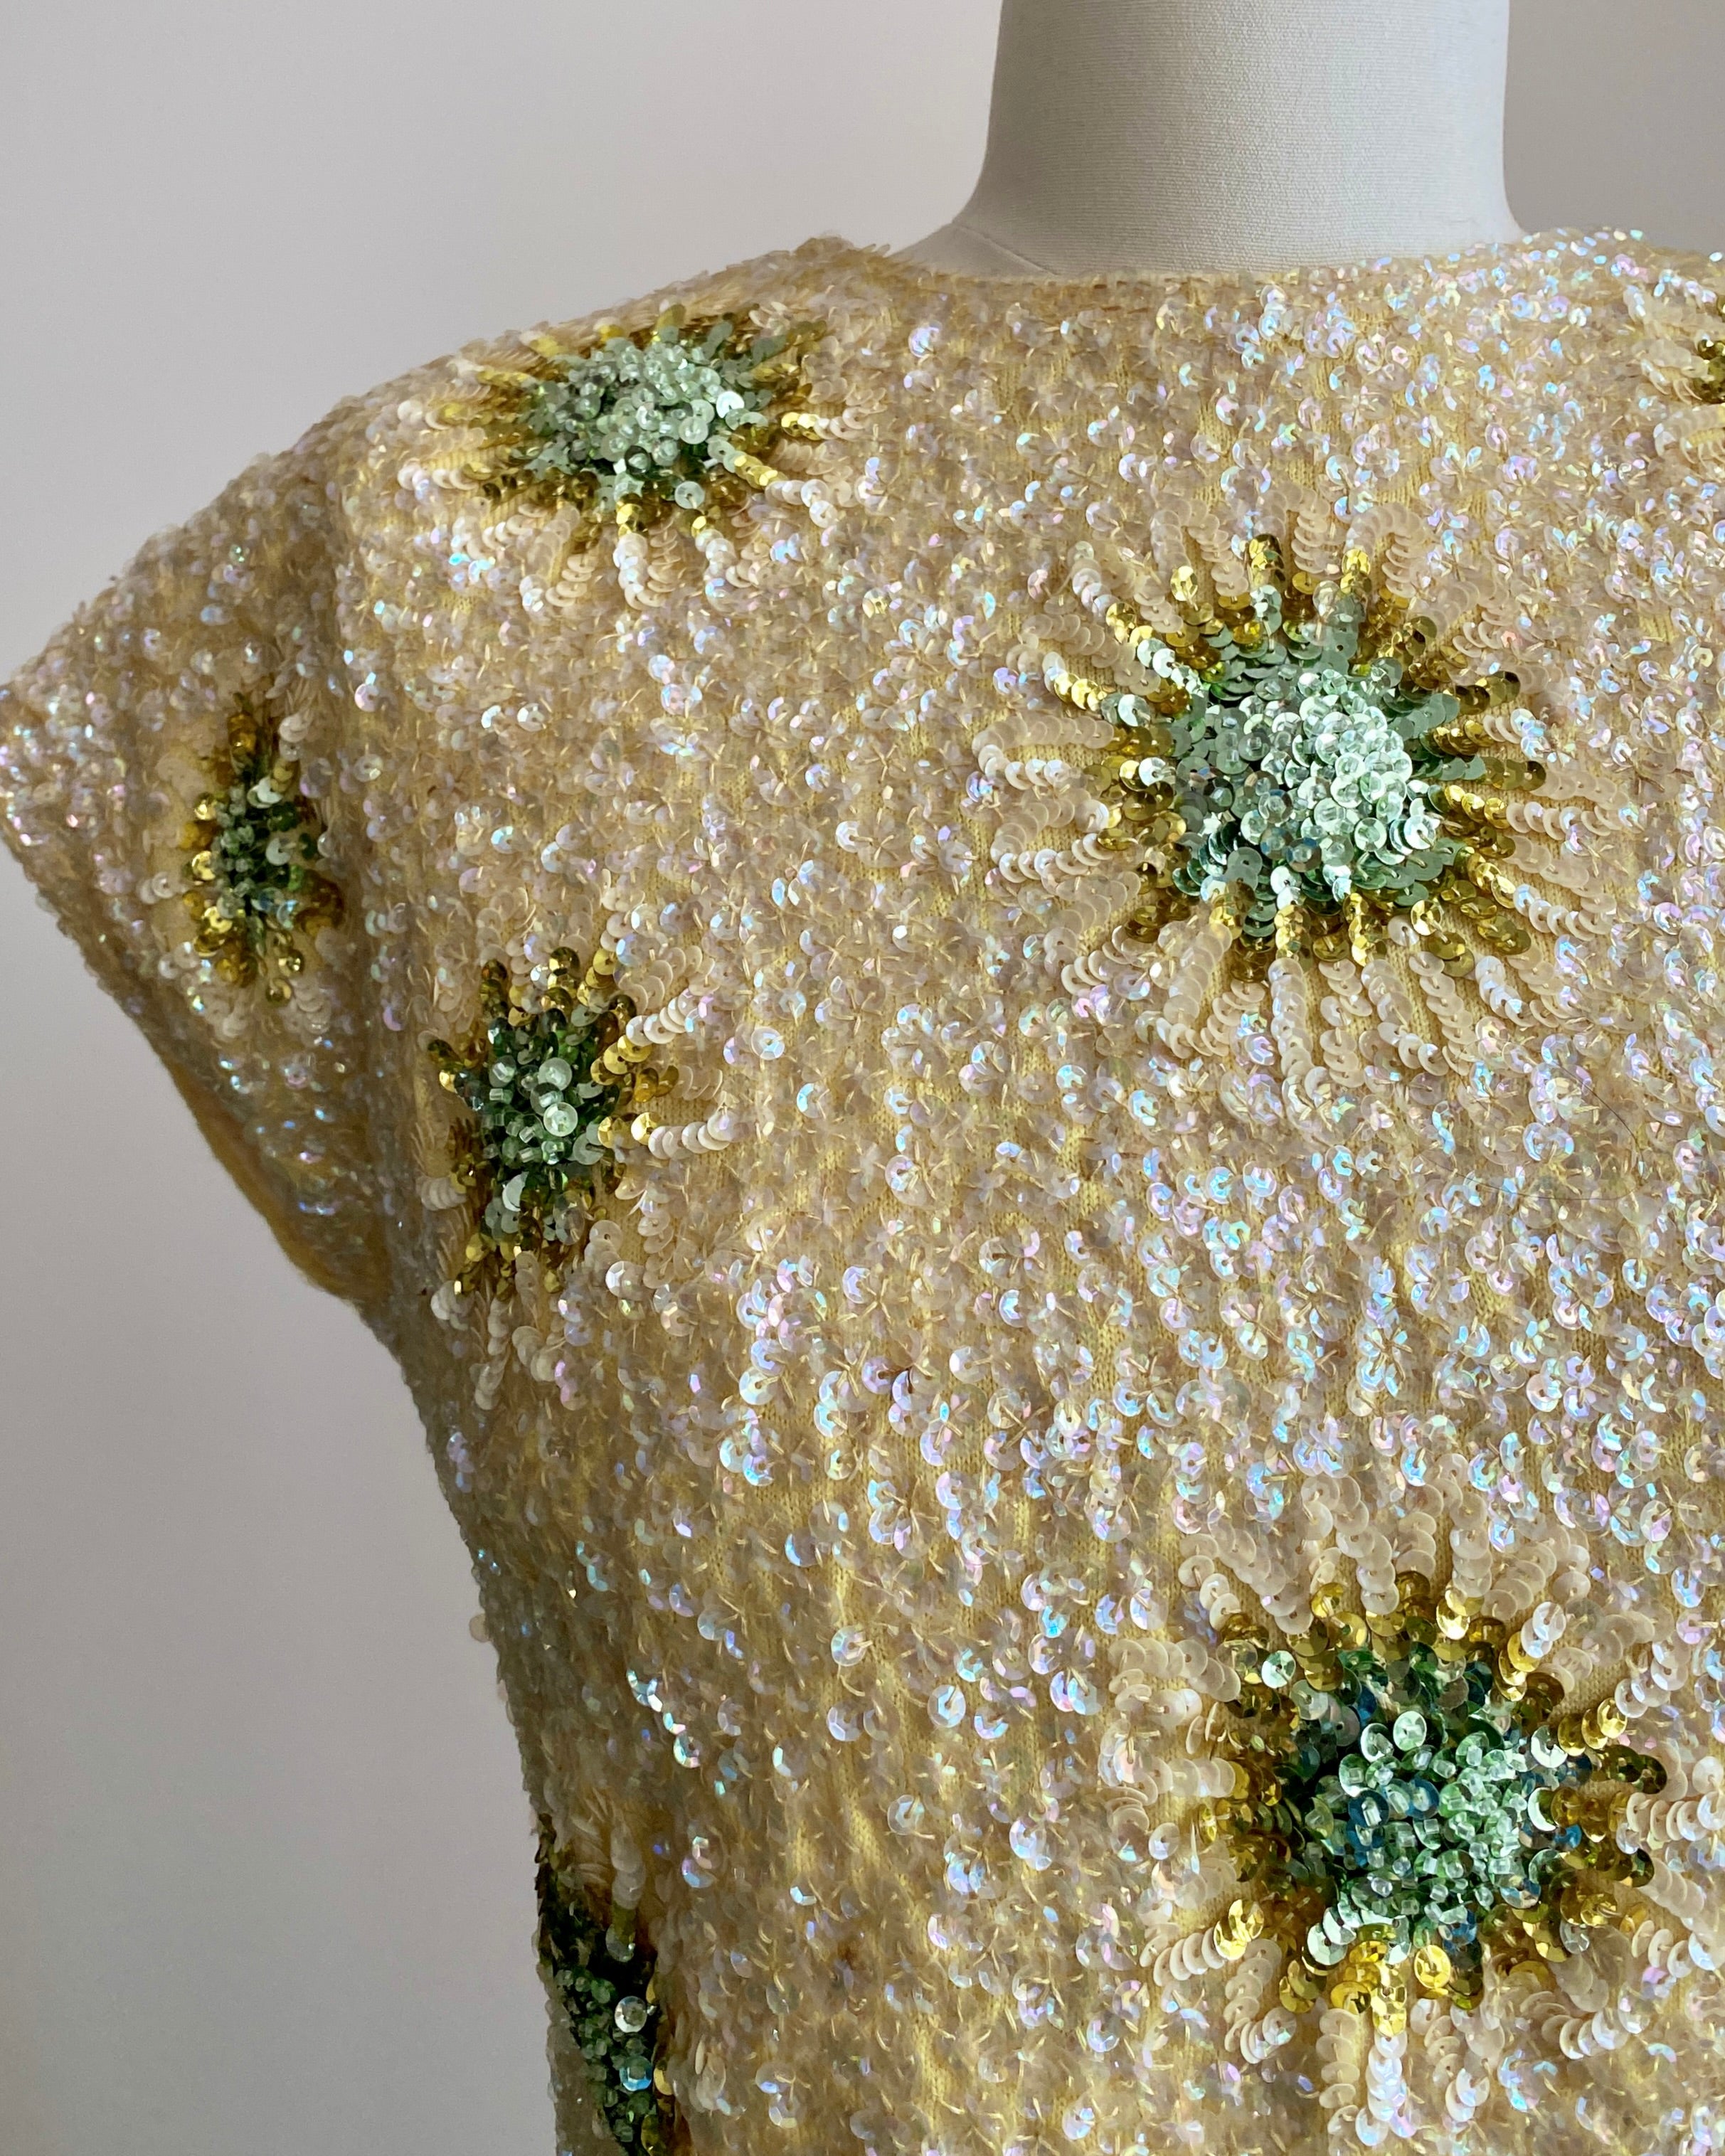 Vintage 1950s Yellow and Green Floral Hand Beaded Sequin Wool Cocktail Knit Shell Top M